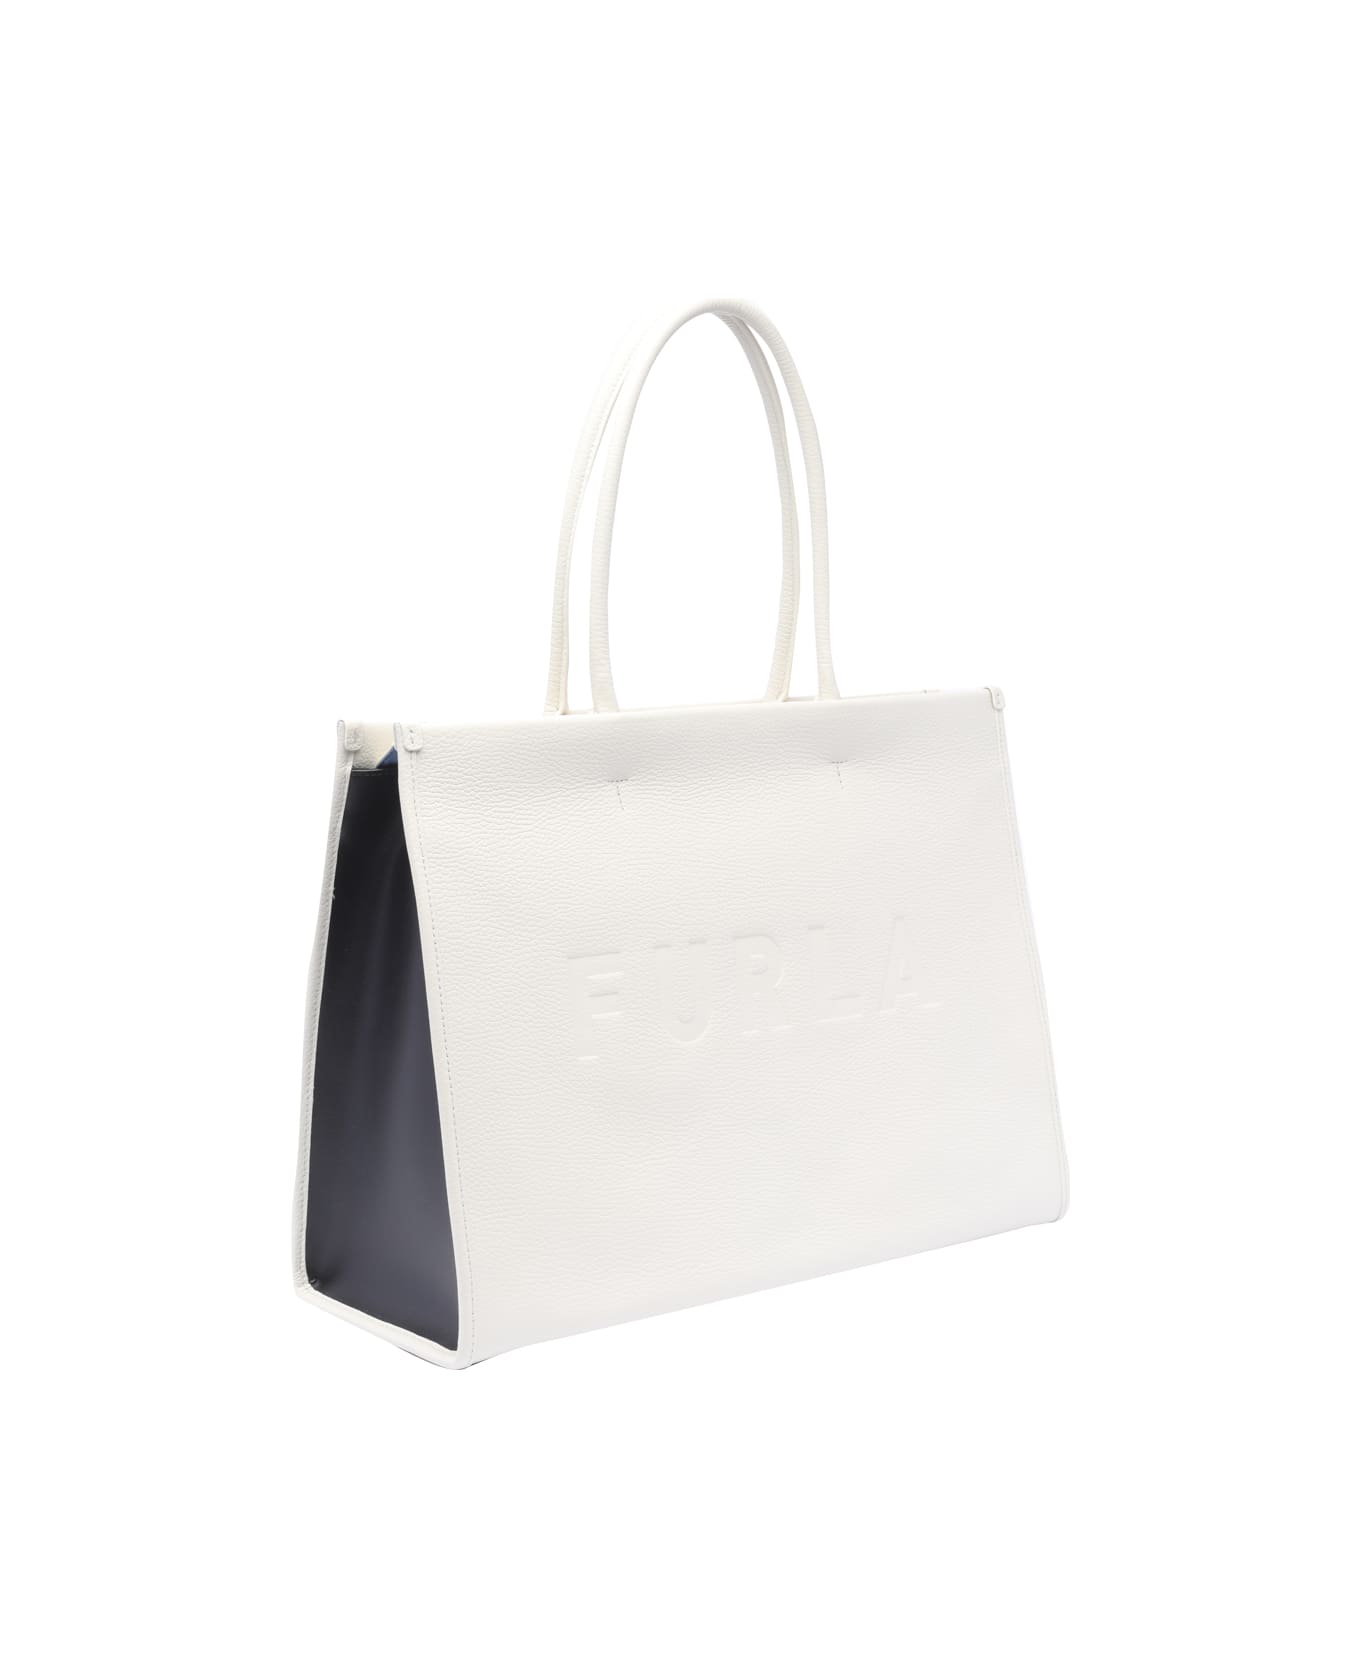 Furla Opportunity Tote Bag - S Marshmallow